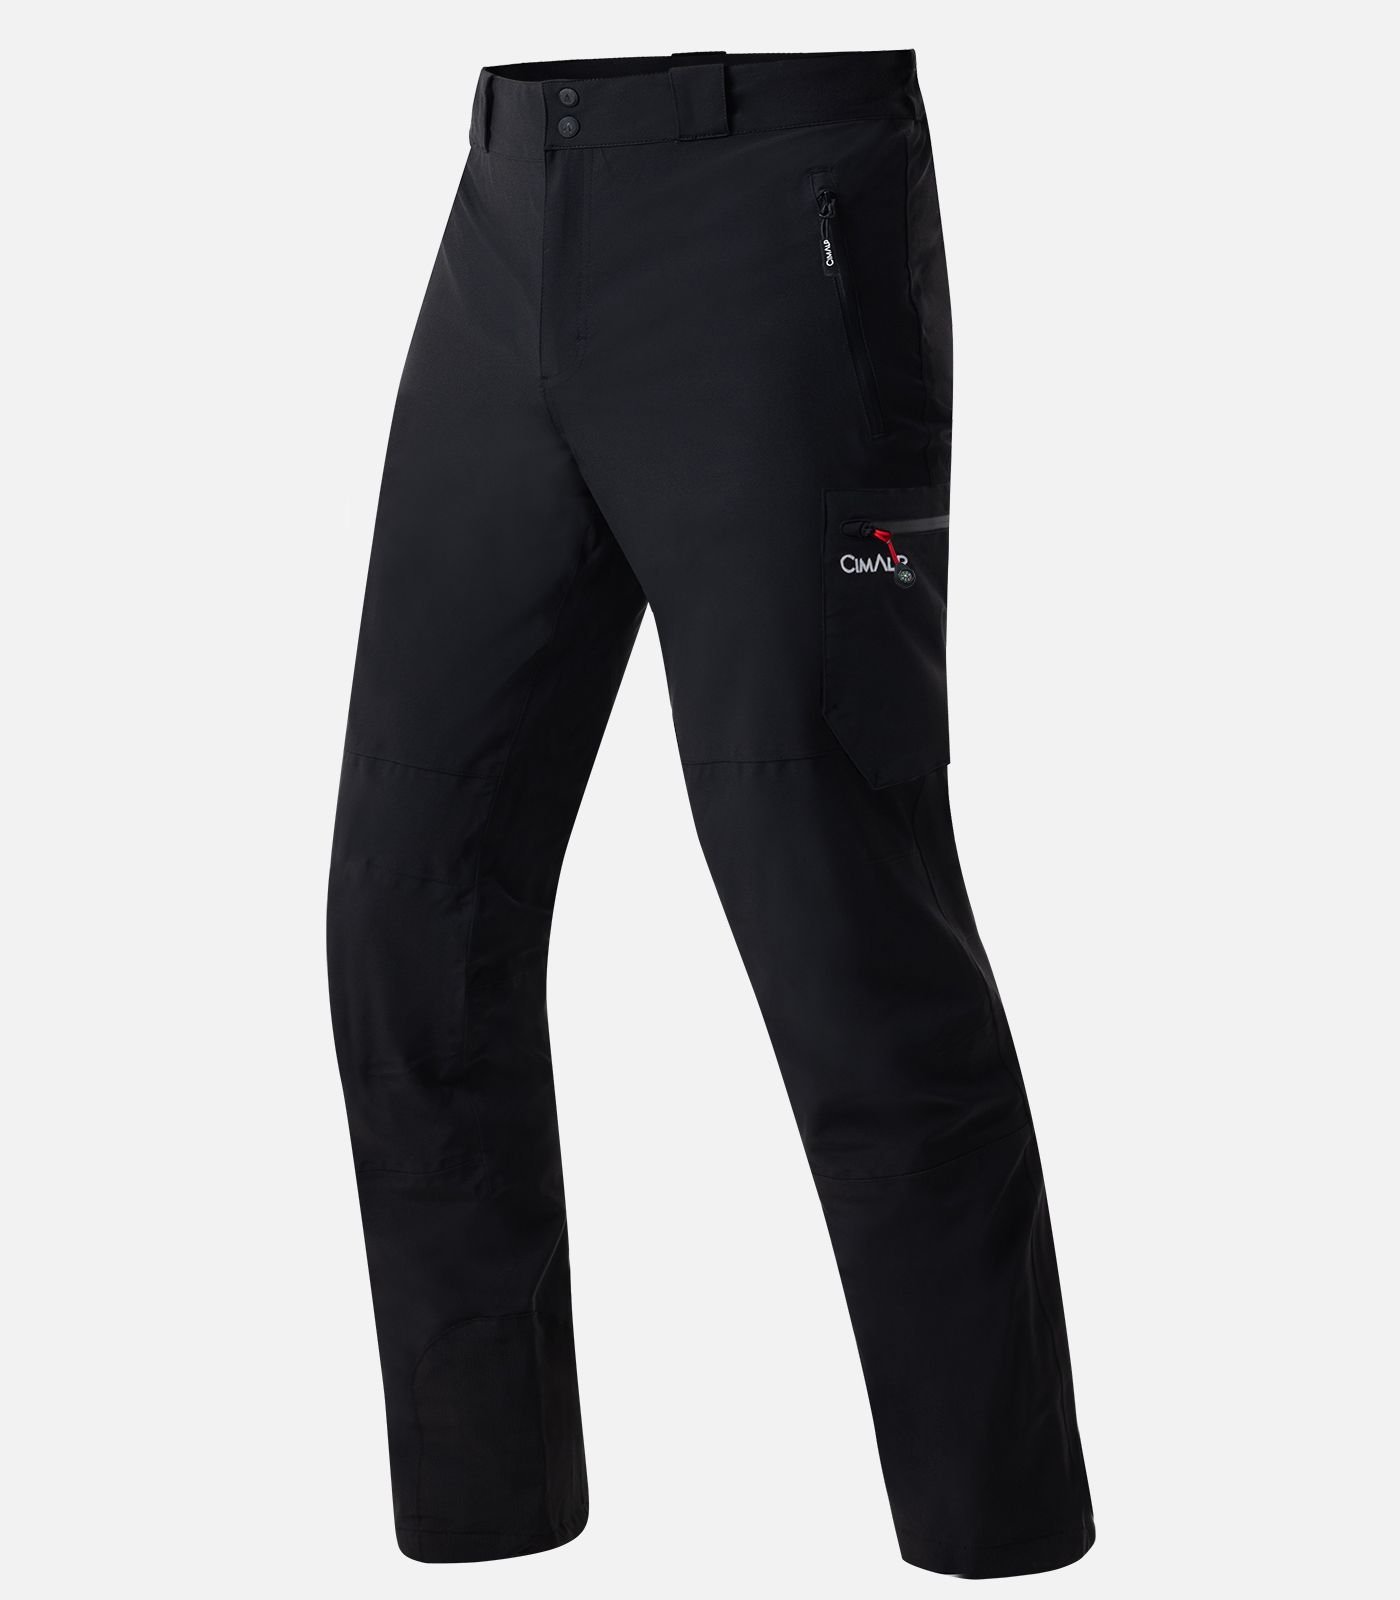 Best trousers for walking and hiking in the great outdoors. – Montane - UK